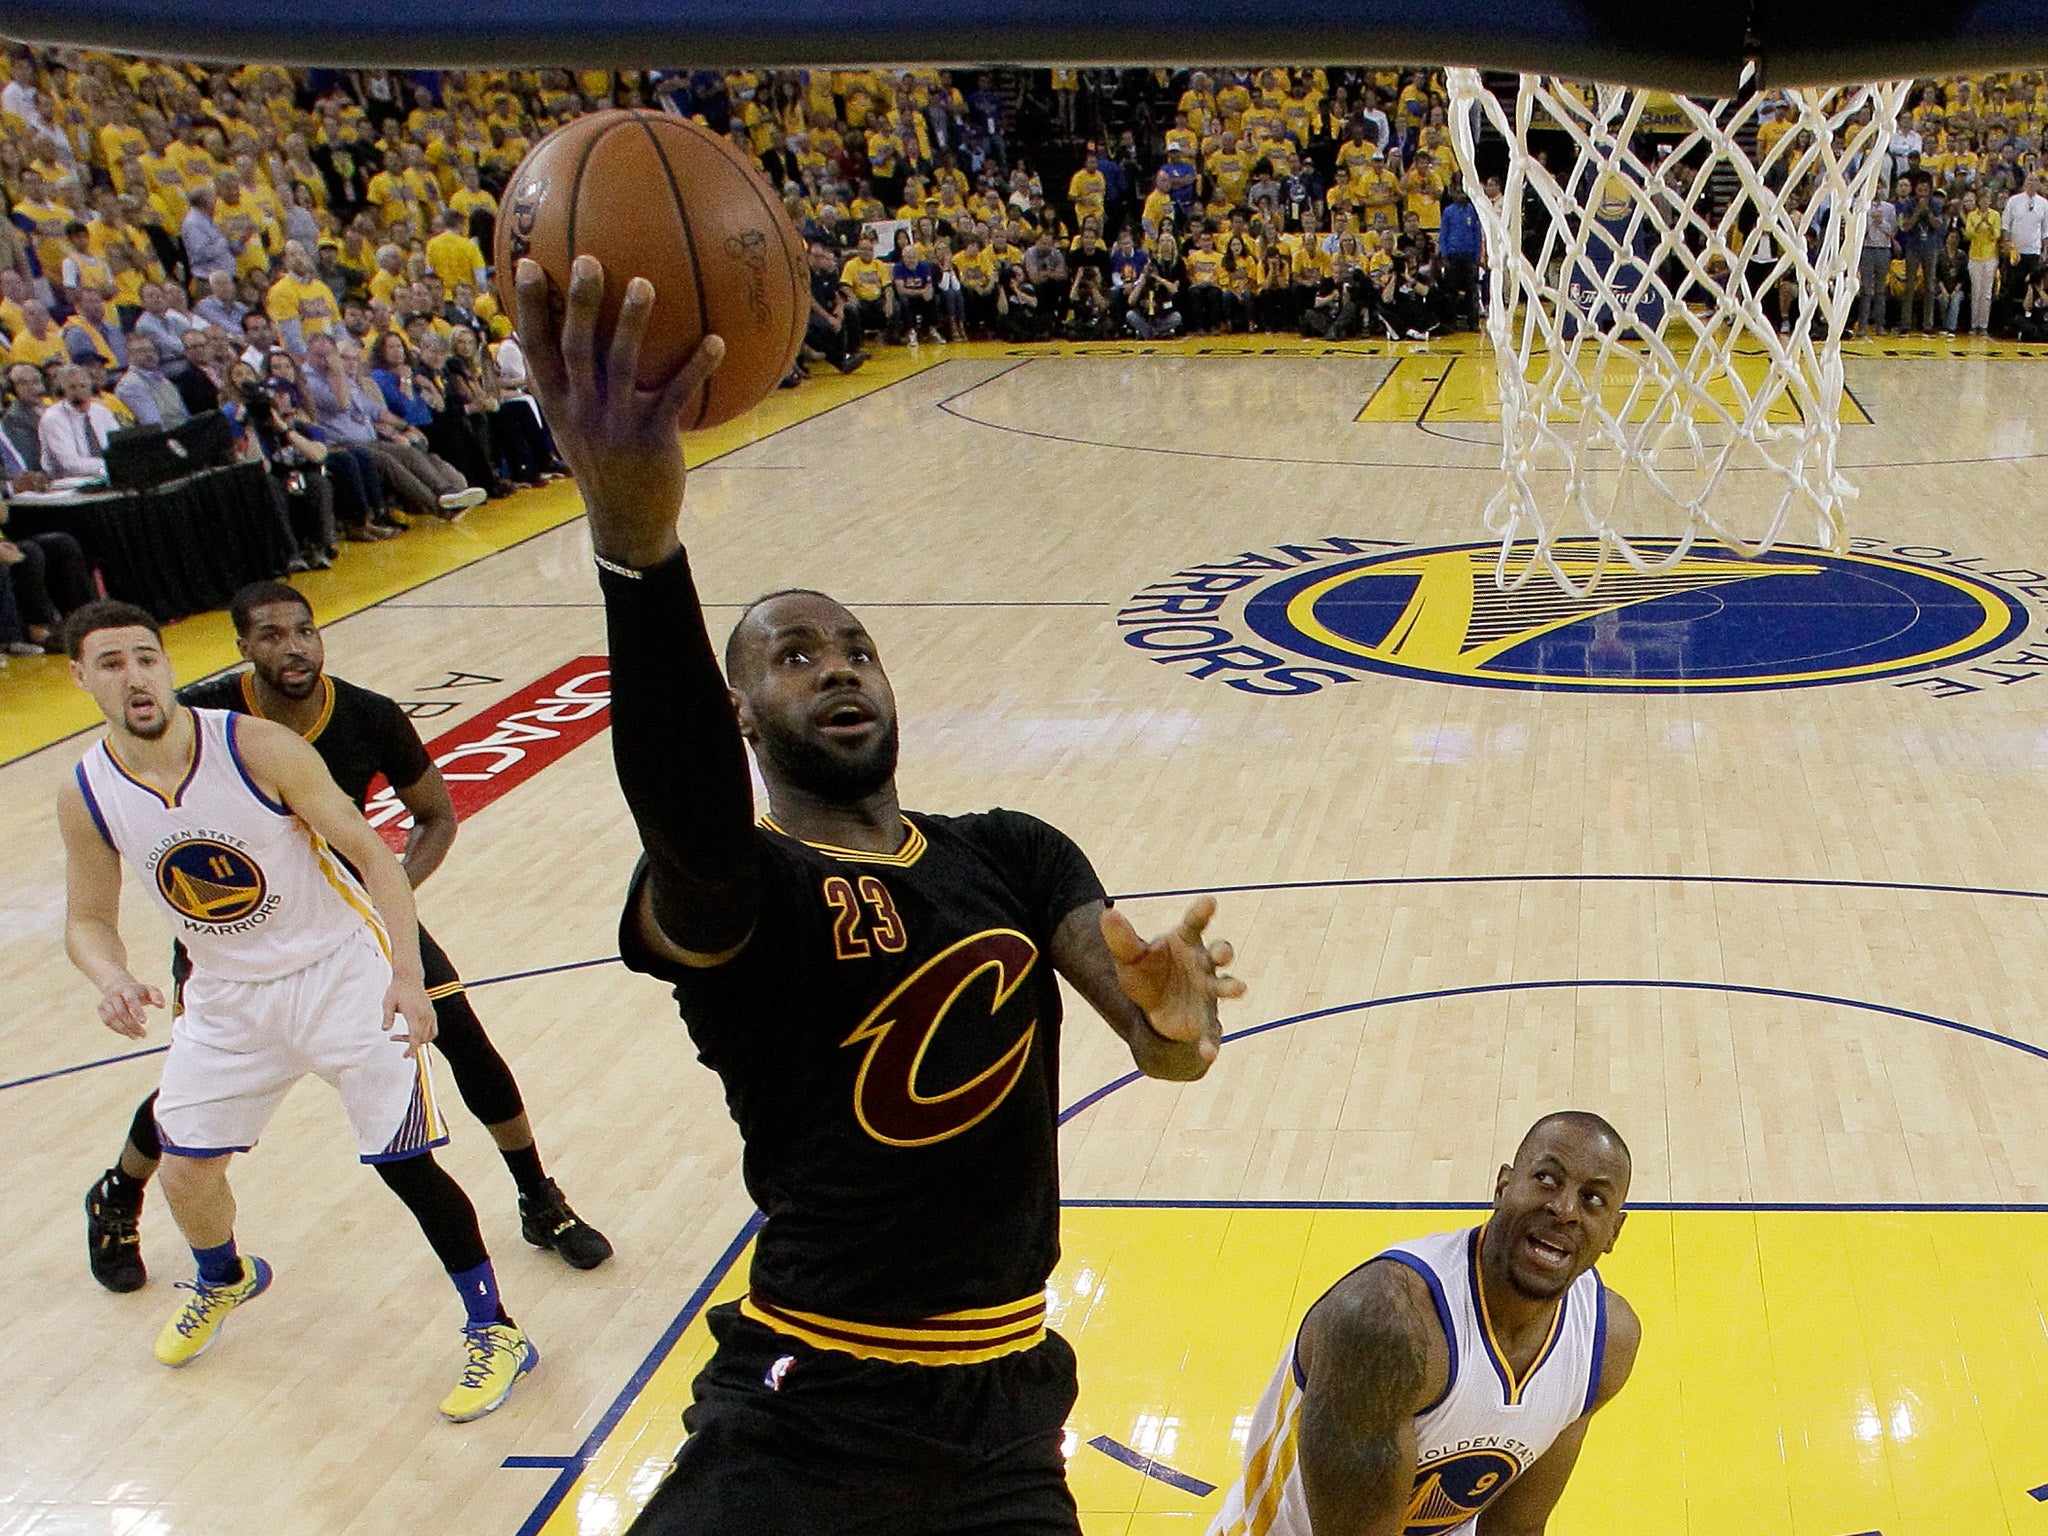 LeBron James scored 41 points as the Cleveland Cavaliers defeated Golden State Warriors 112-97